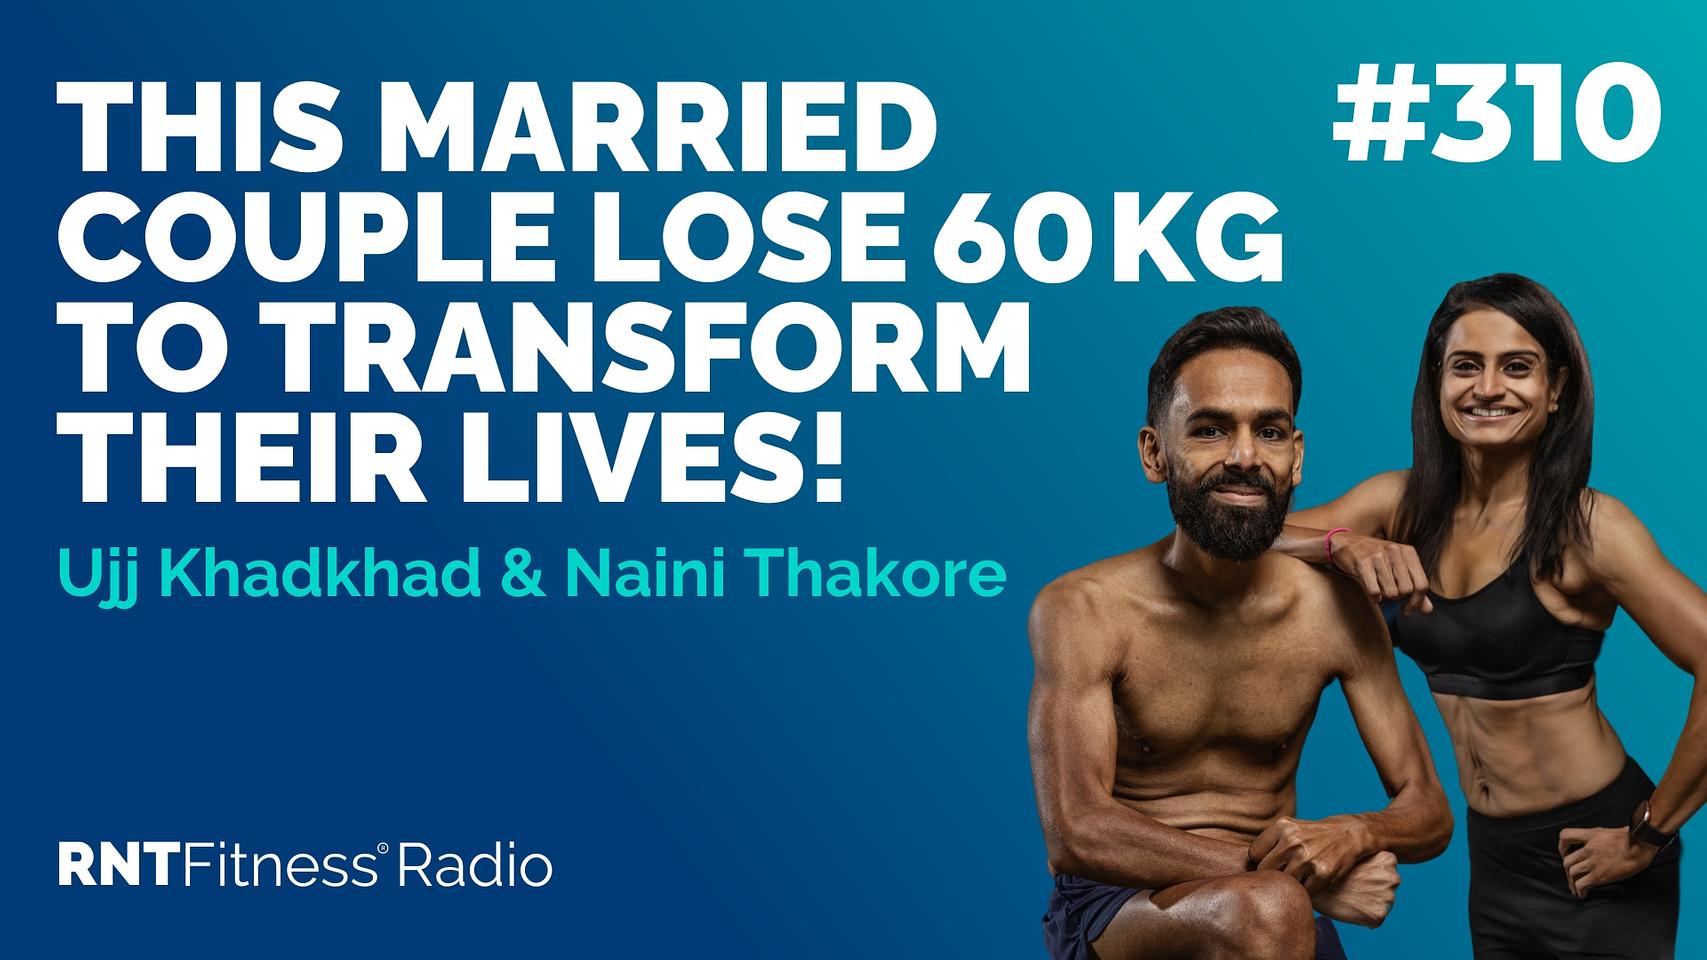 Ep 310 - Hall of Fame | Ujj Khadkhad & Naini Thakore: This Married Couple Lose 60kg To Transform Their LIVES!